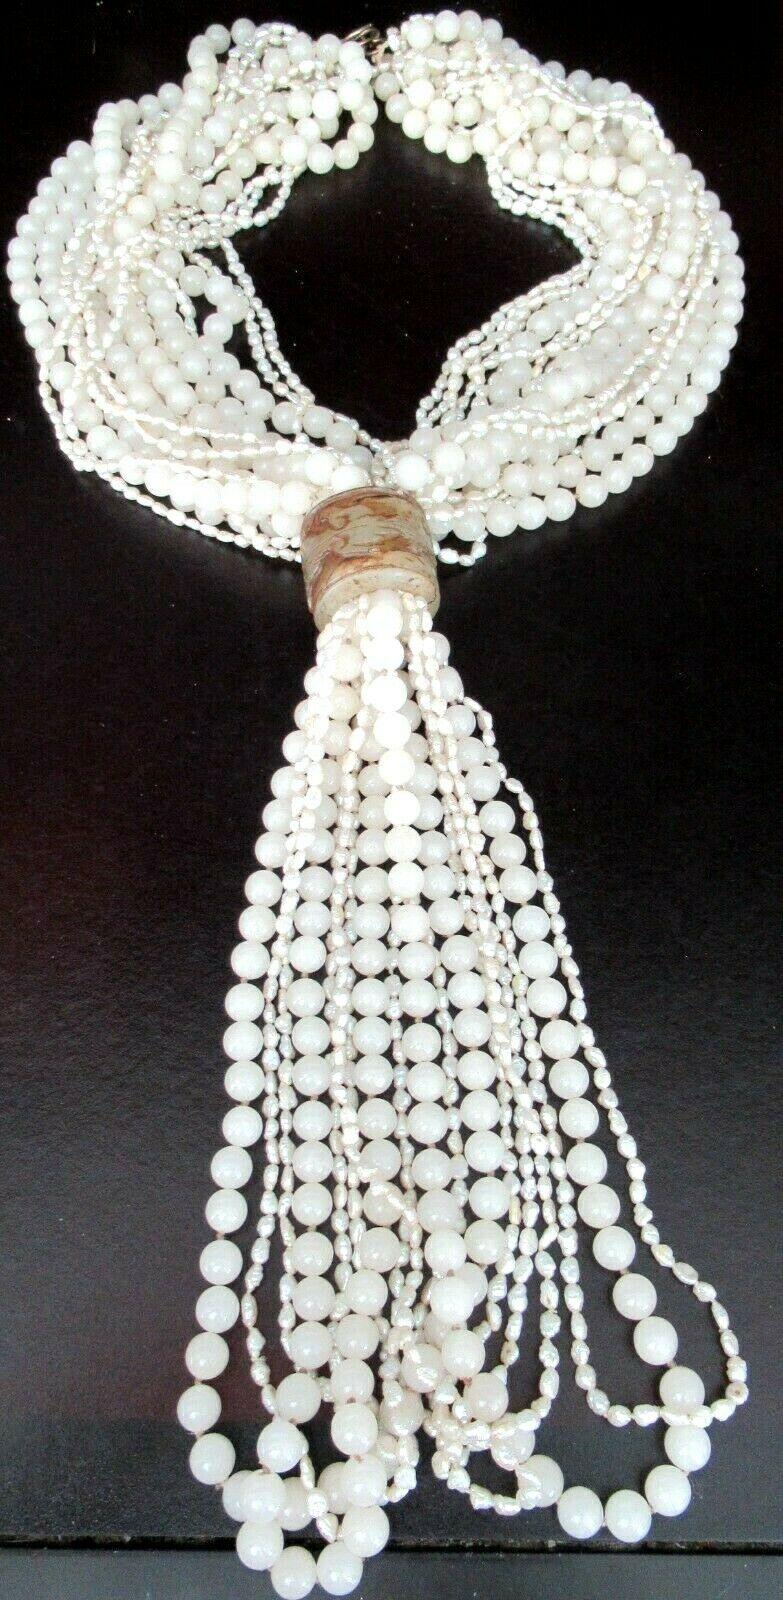 Simply Beautiful! Sensational High Quality 18 strand Necklace comprising Pearls of various shapes and sizes with a Carved Quartz enhancement. Clasp marked Silver on the back with a seahorse on the front. Necklace measures approx. 20